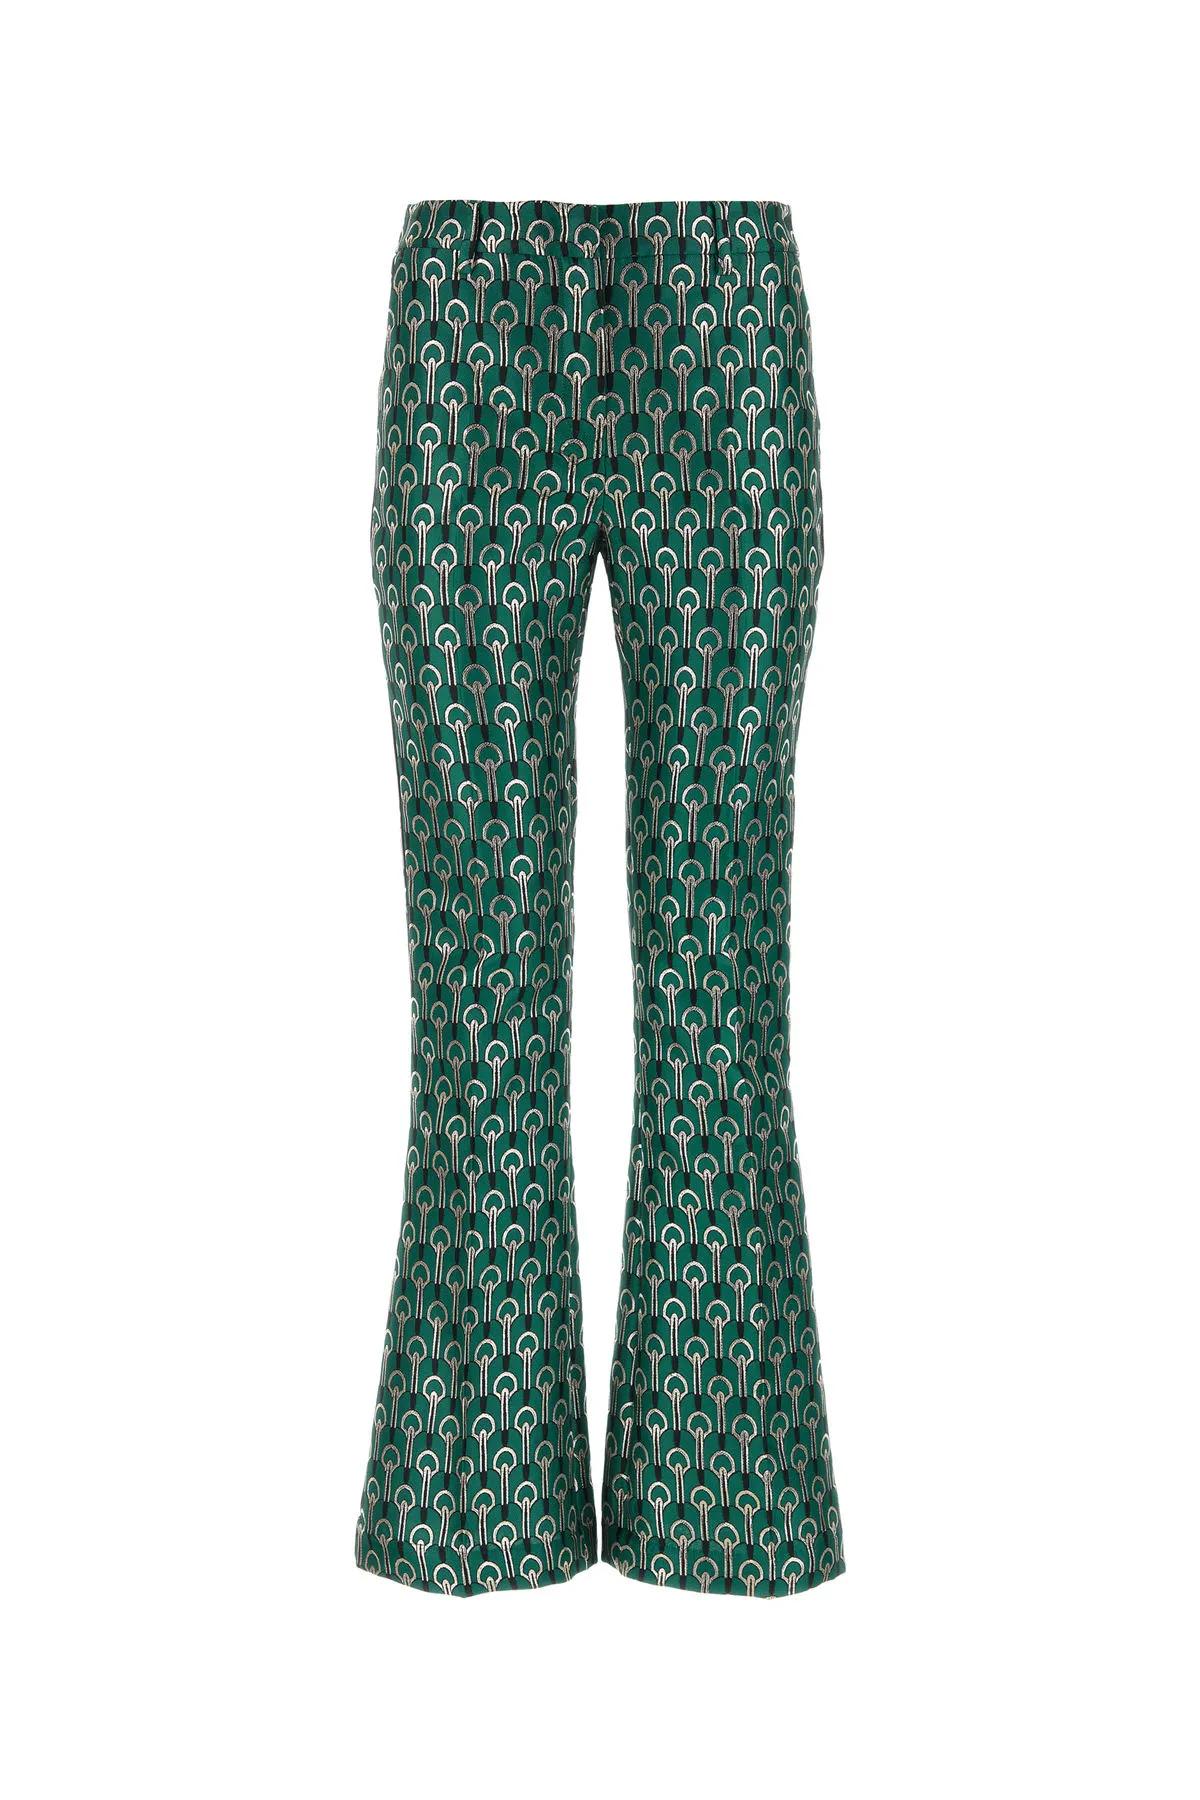 Embroidered Polyester Blend Girino Pant